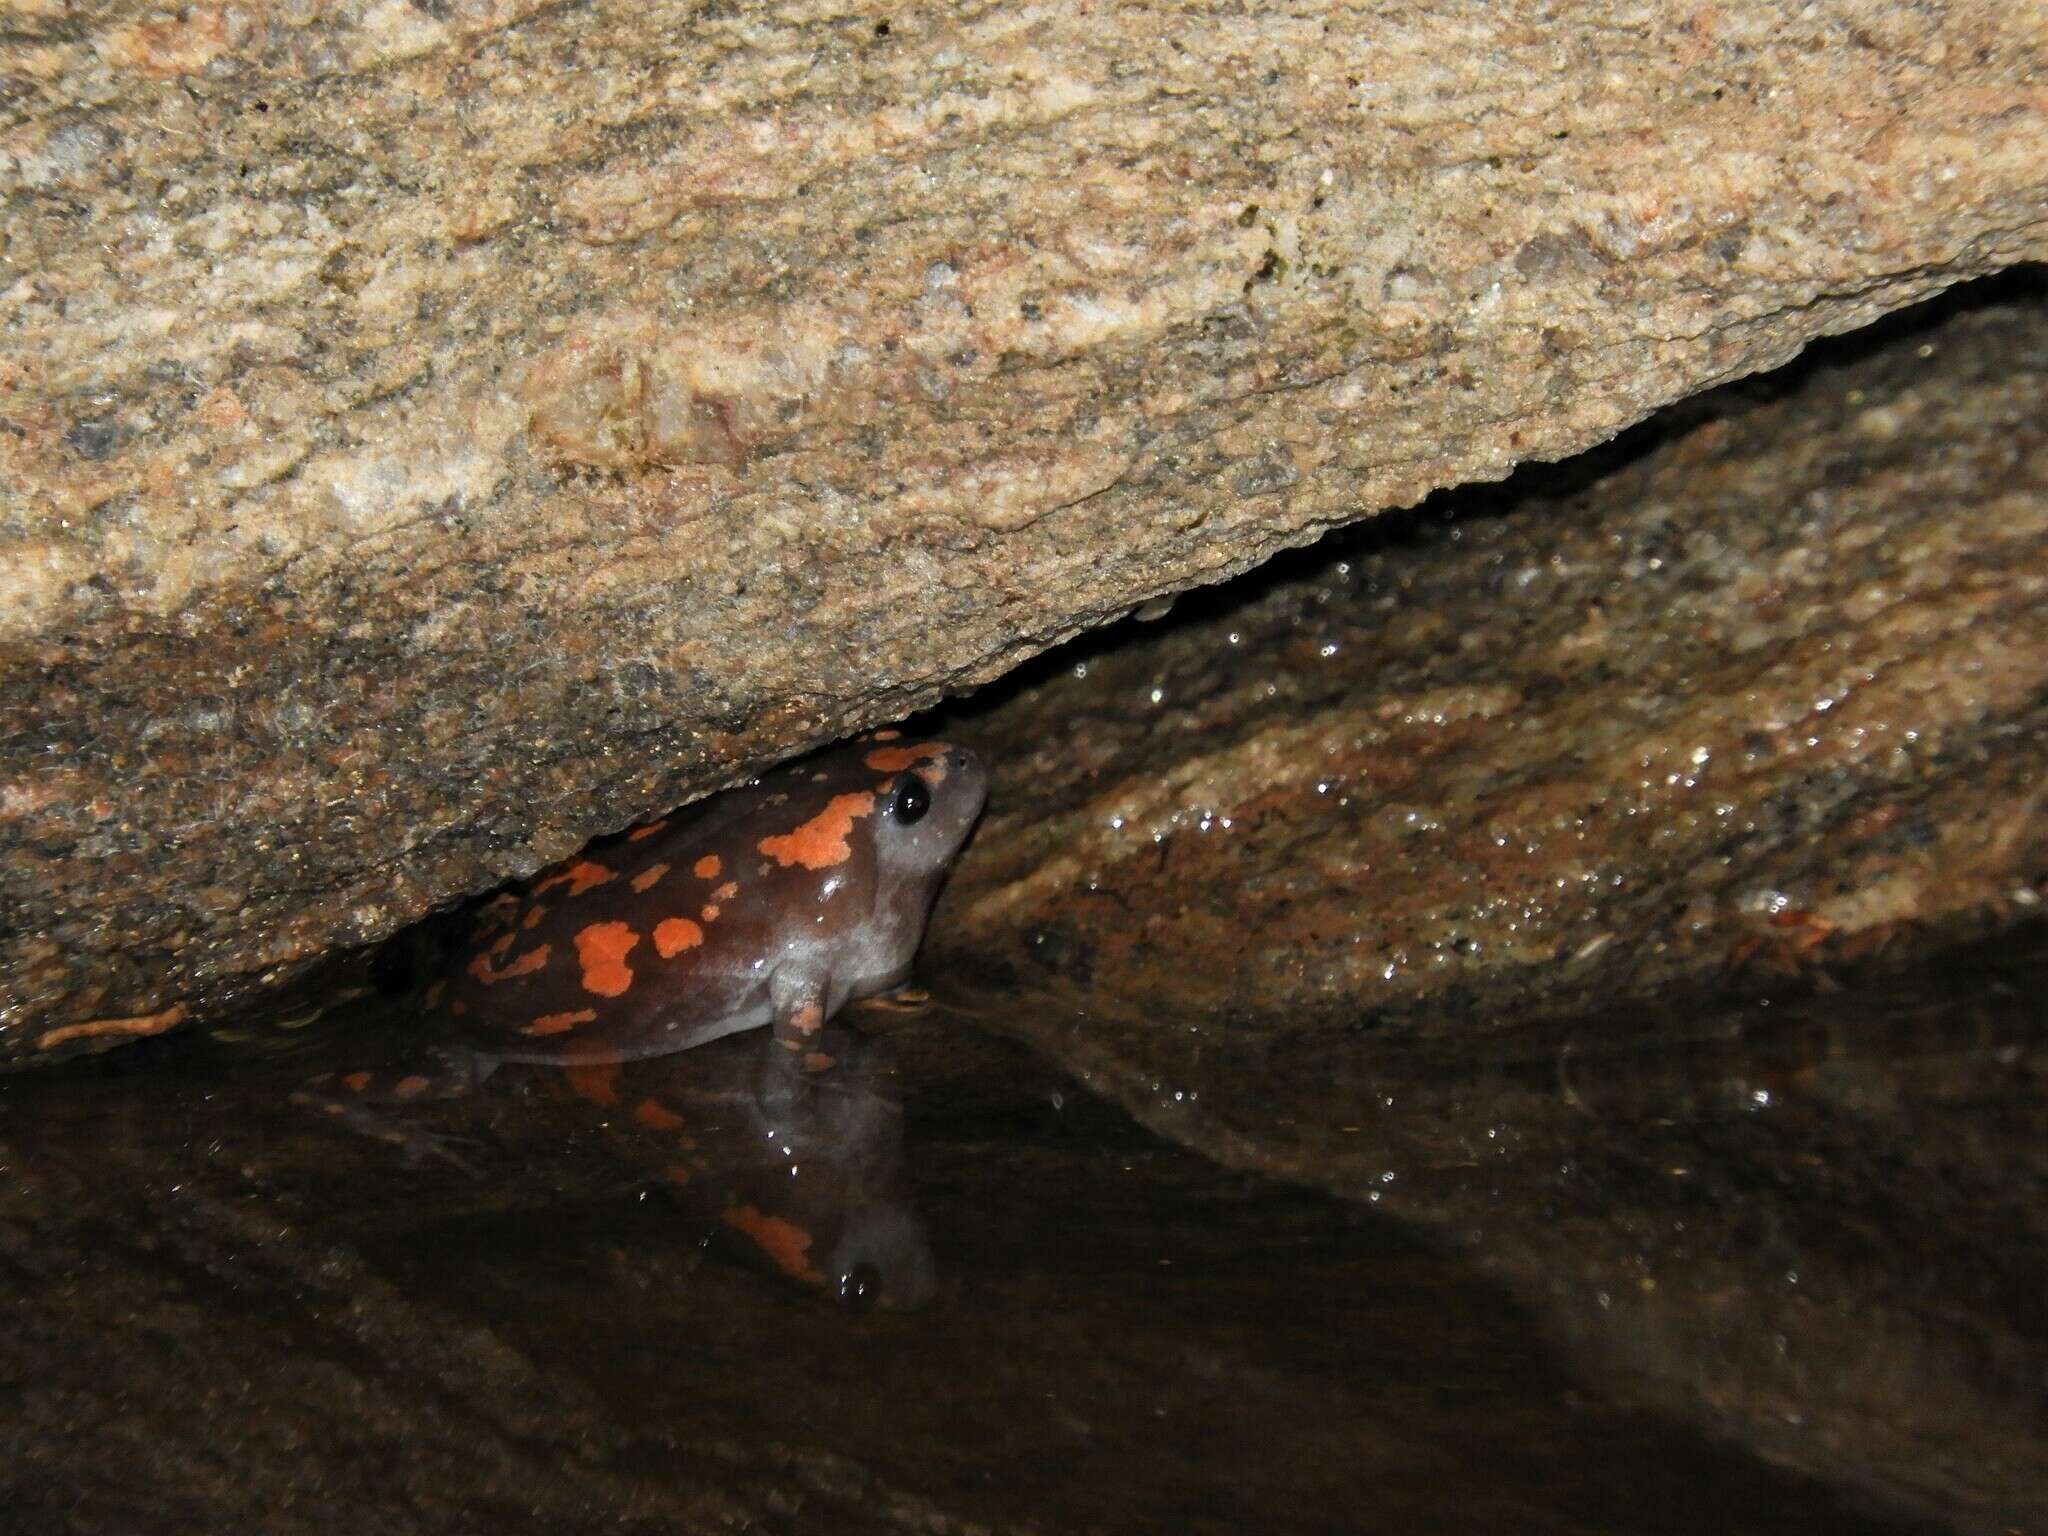 Image of marbled rubber frog